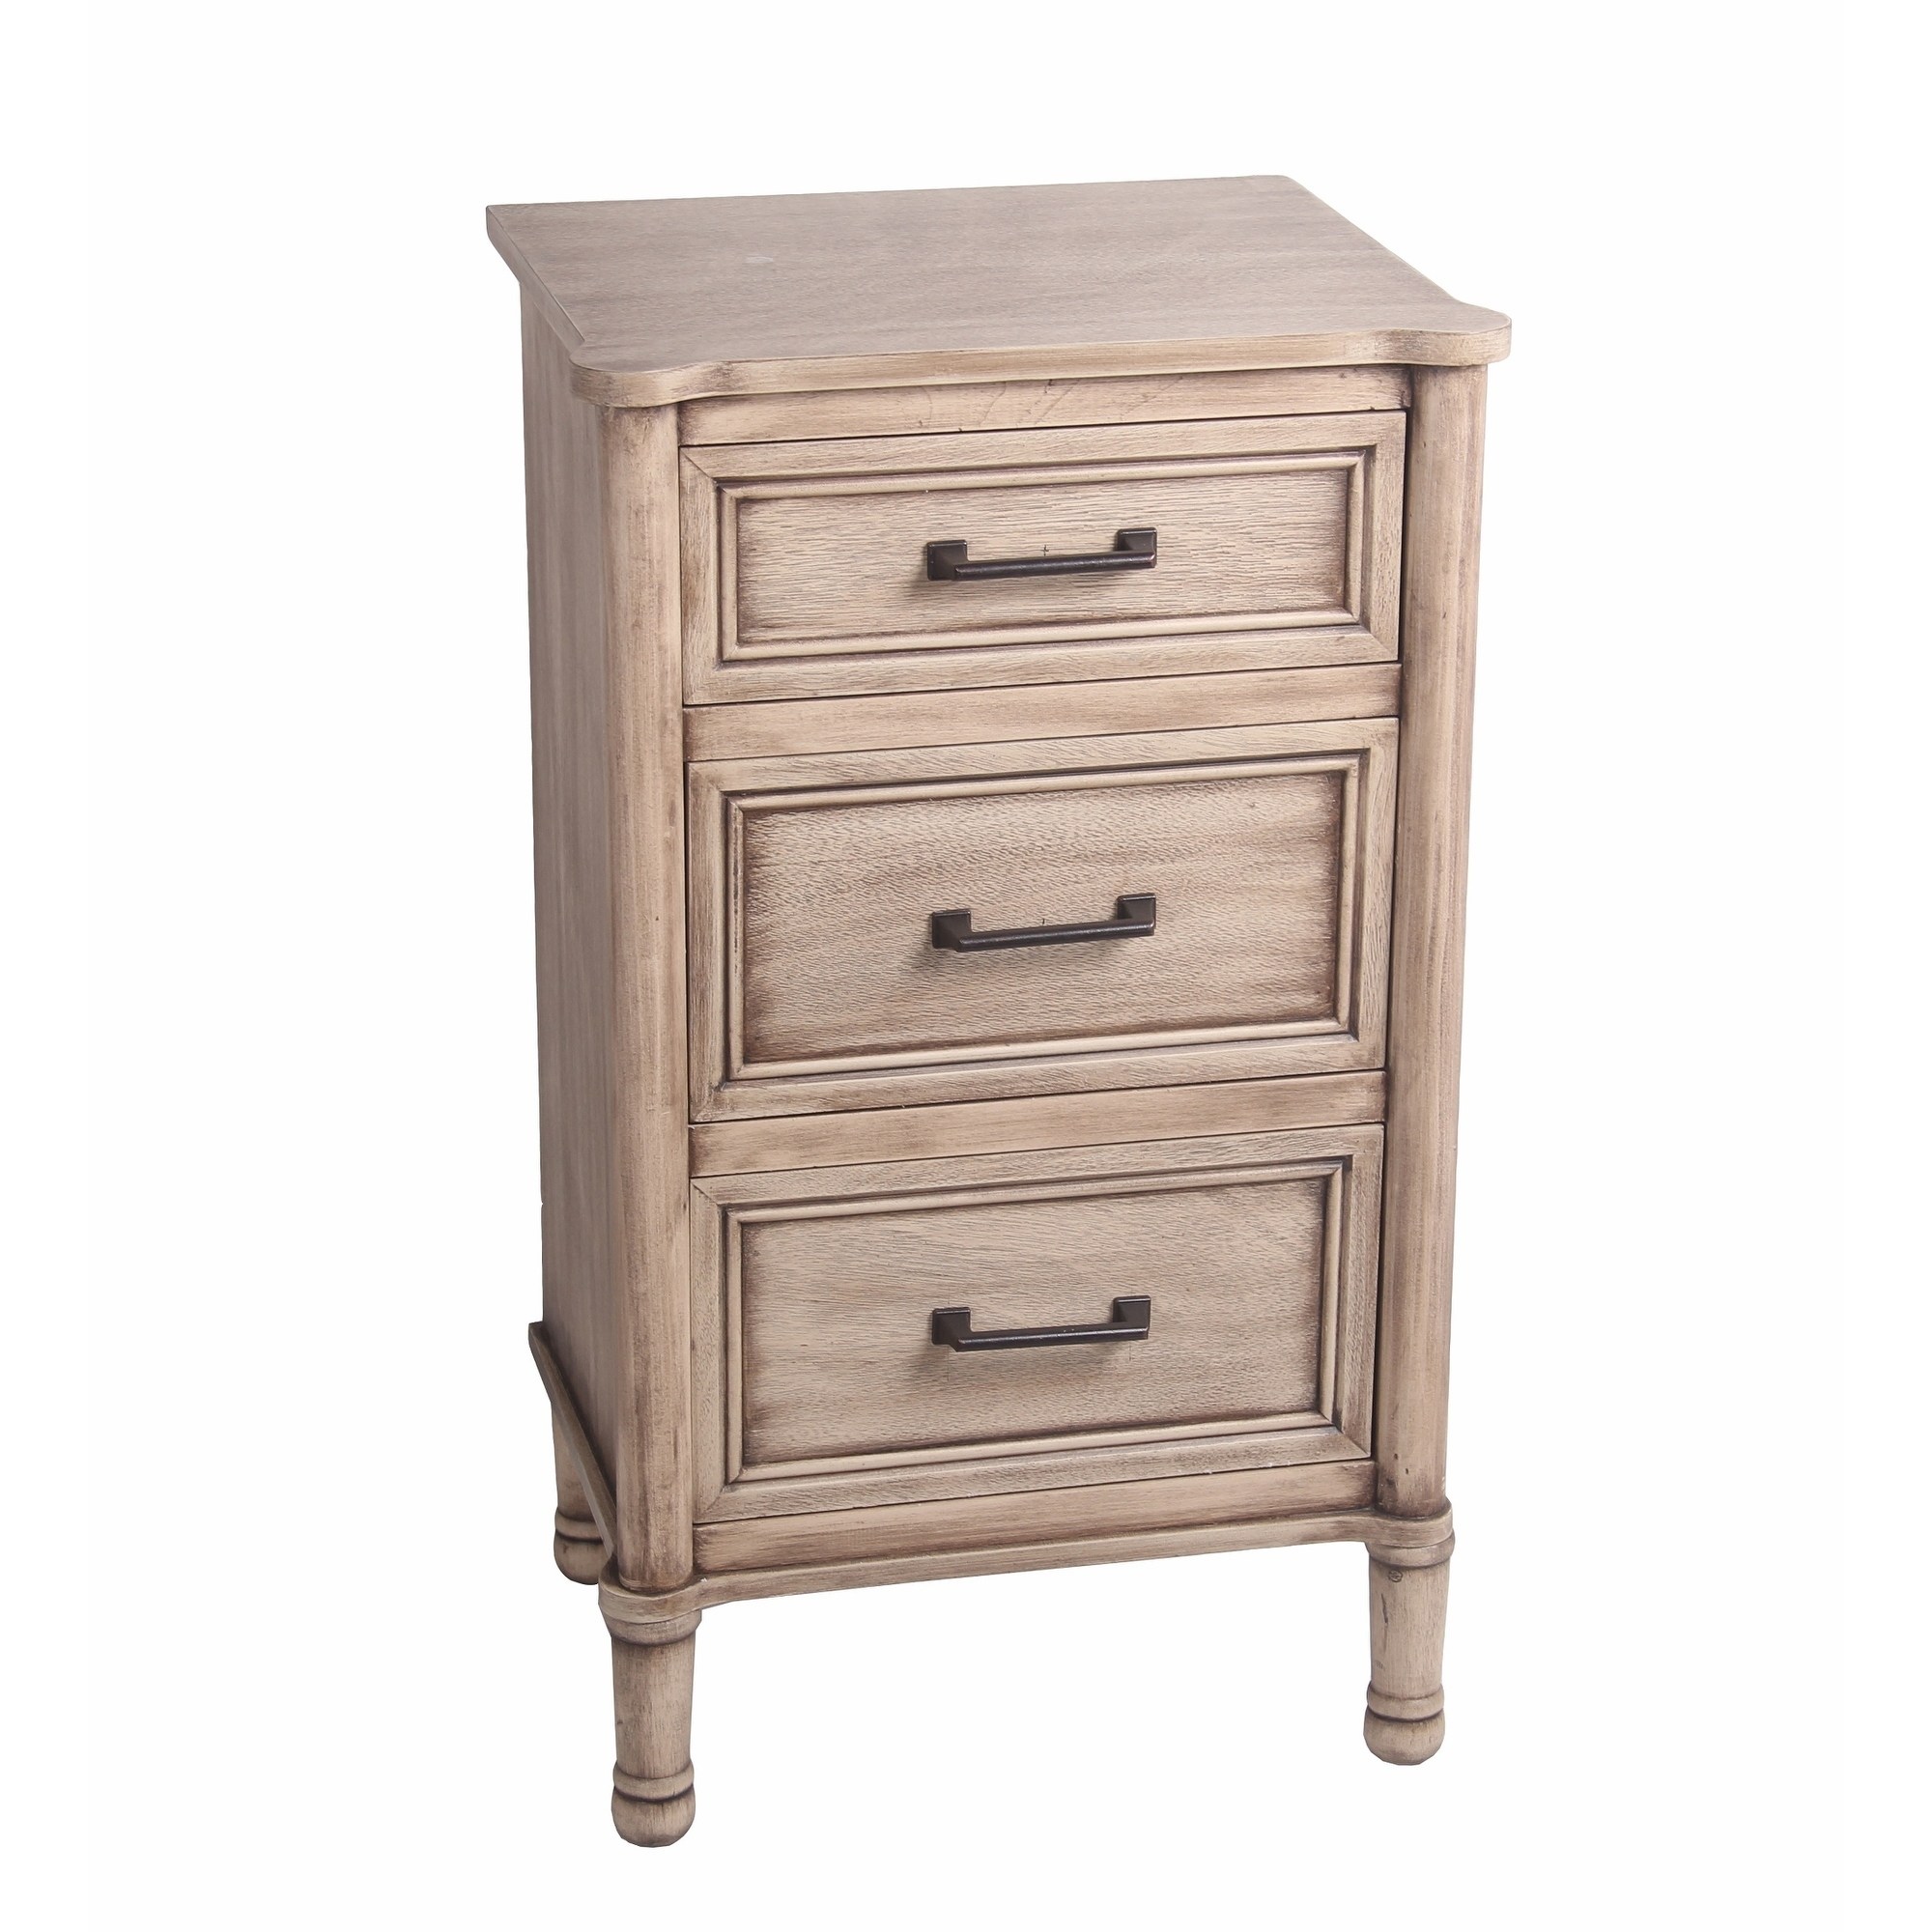 privilege drawer sahara morning wood accent stand free linon galway table white shipping today bath and beyond instant pot battery lamp bar cabinet cordless operated lamps stools